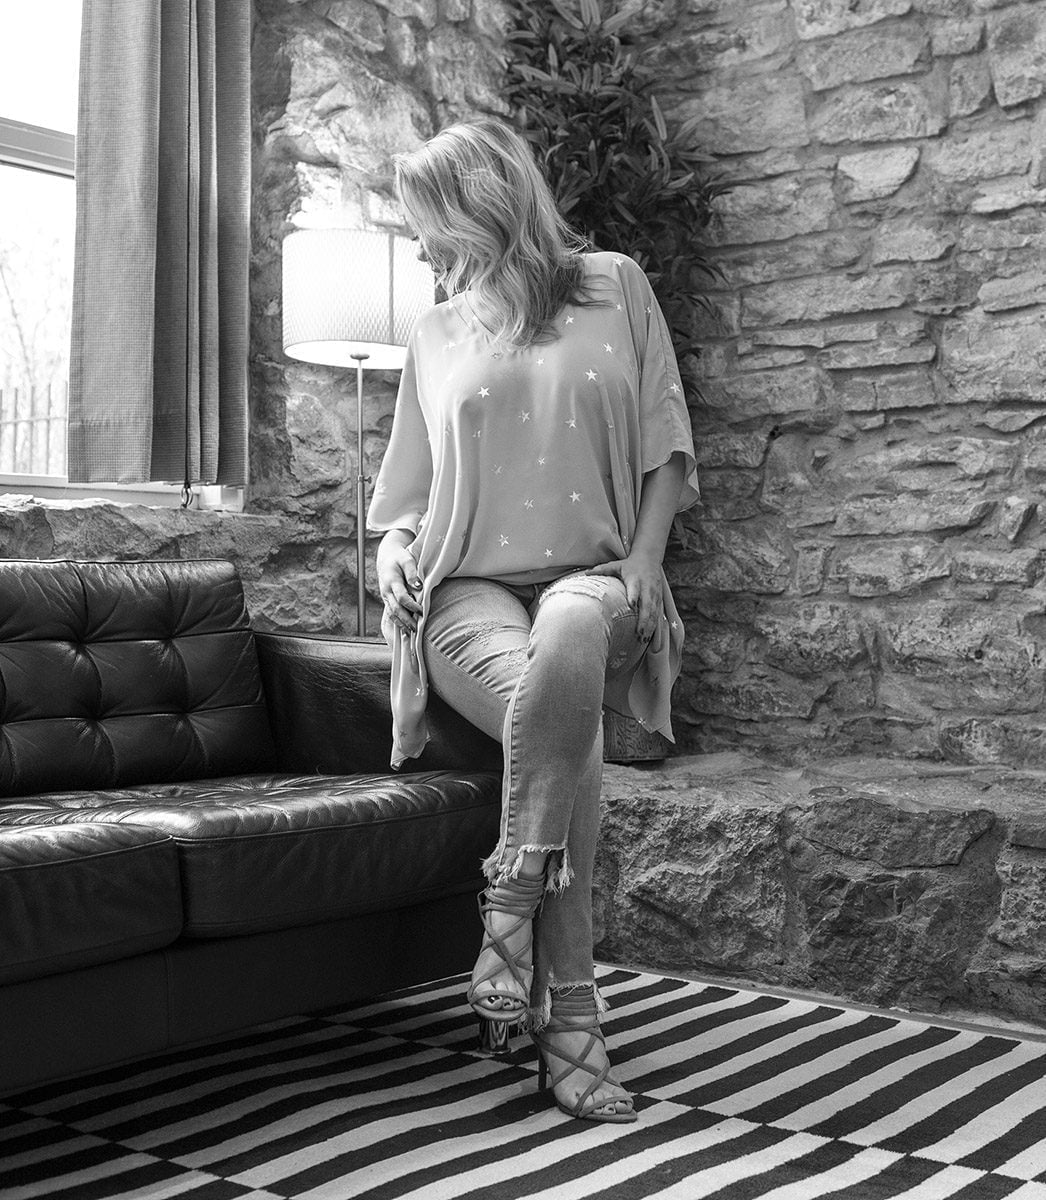 Megan Love, black and white image, wearing jeans and blouse